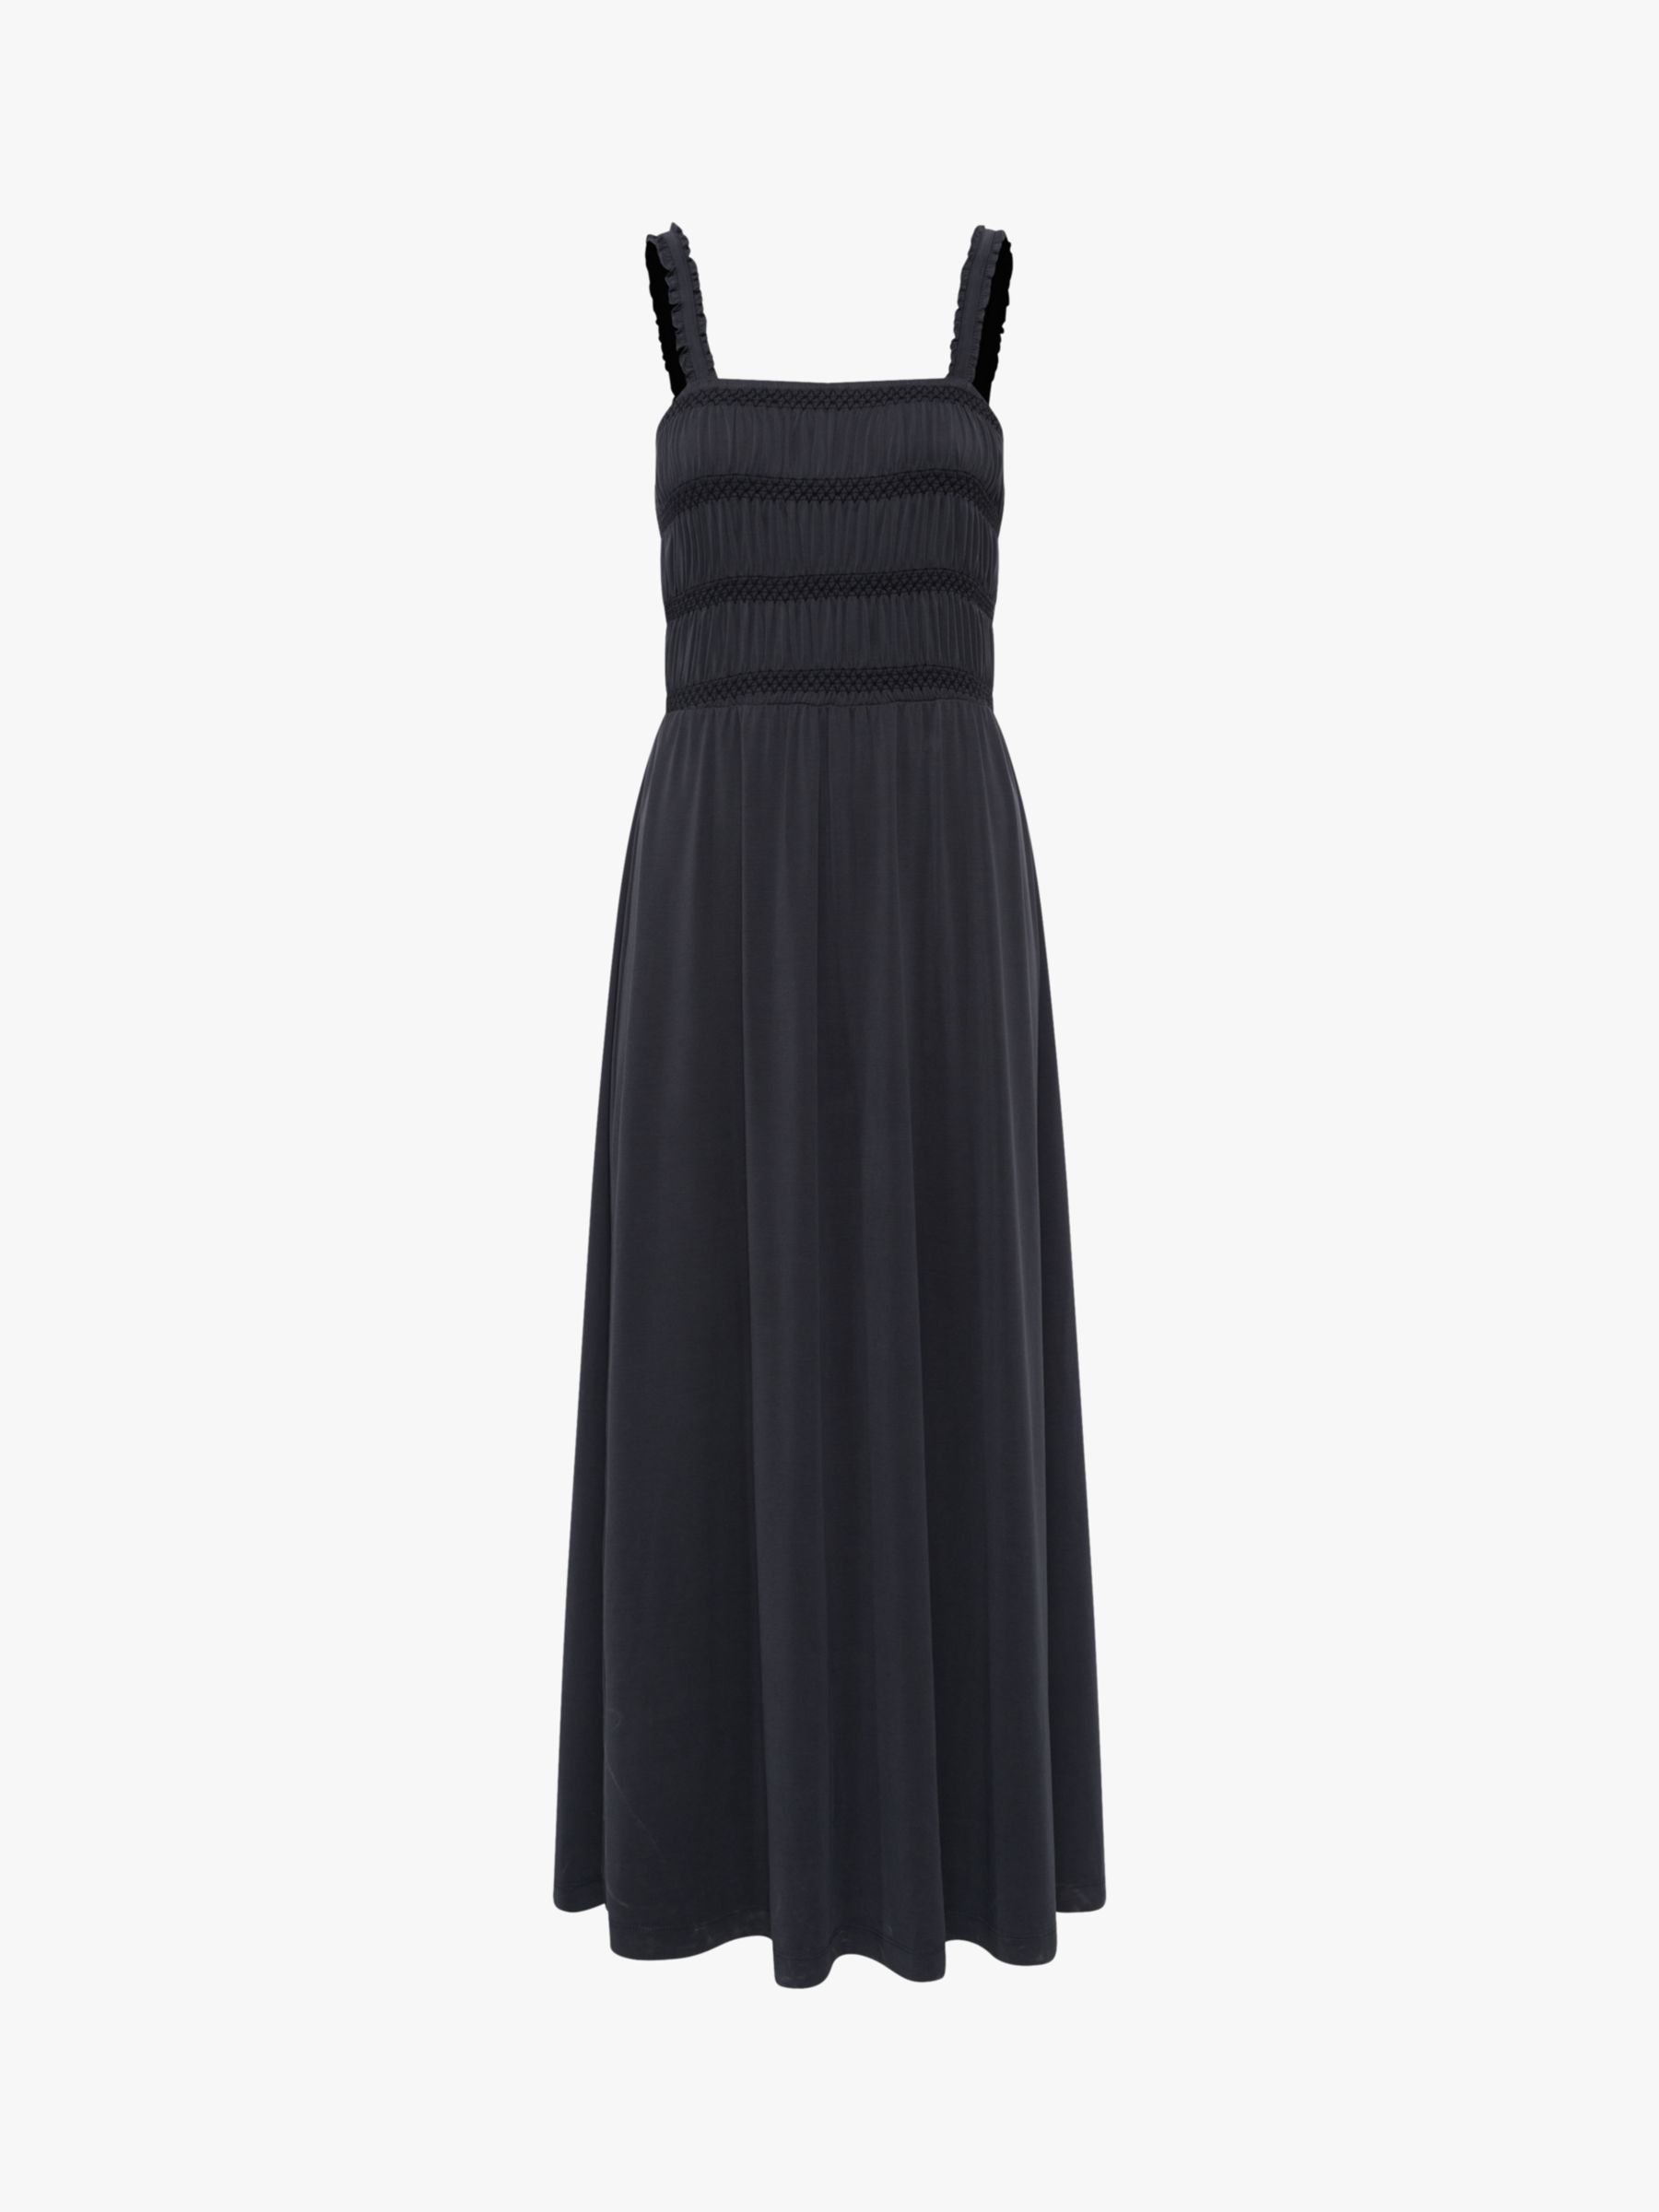 French Connection Rinia Maxi Dress, Washed Black, XS